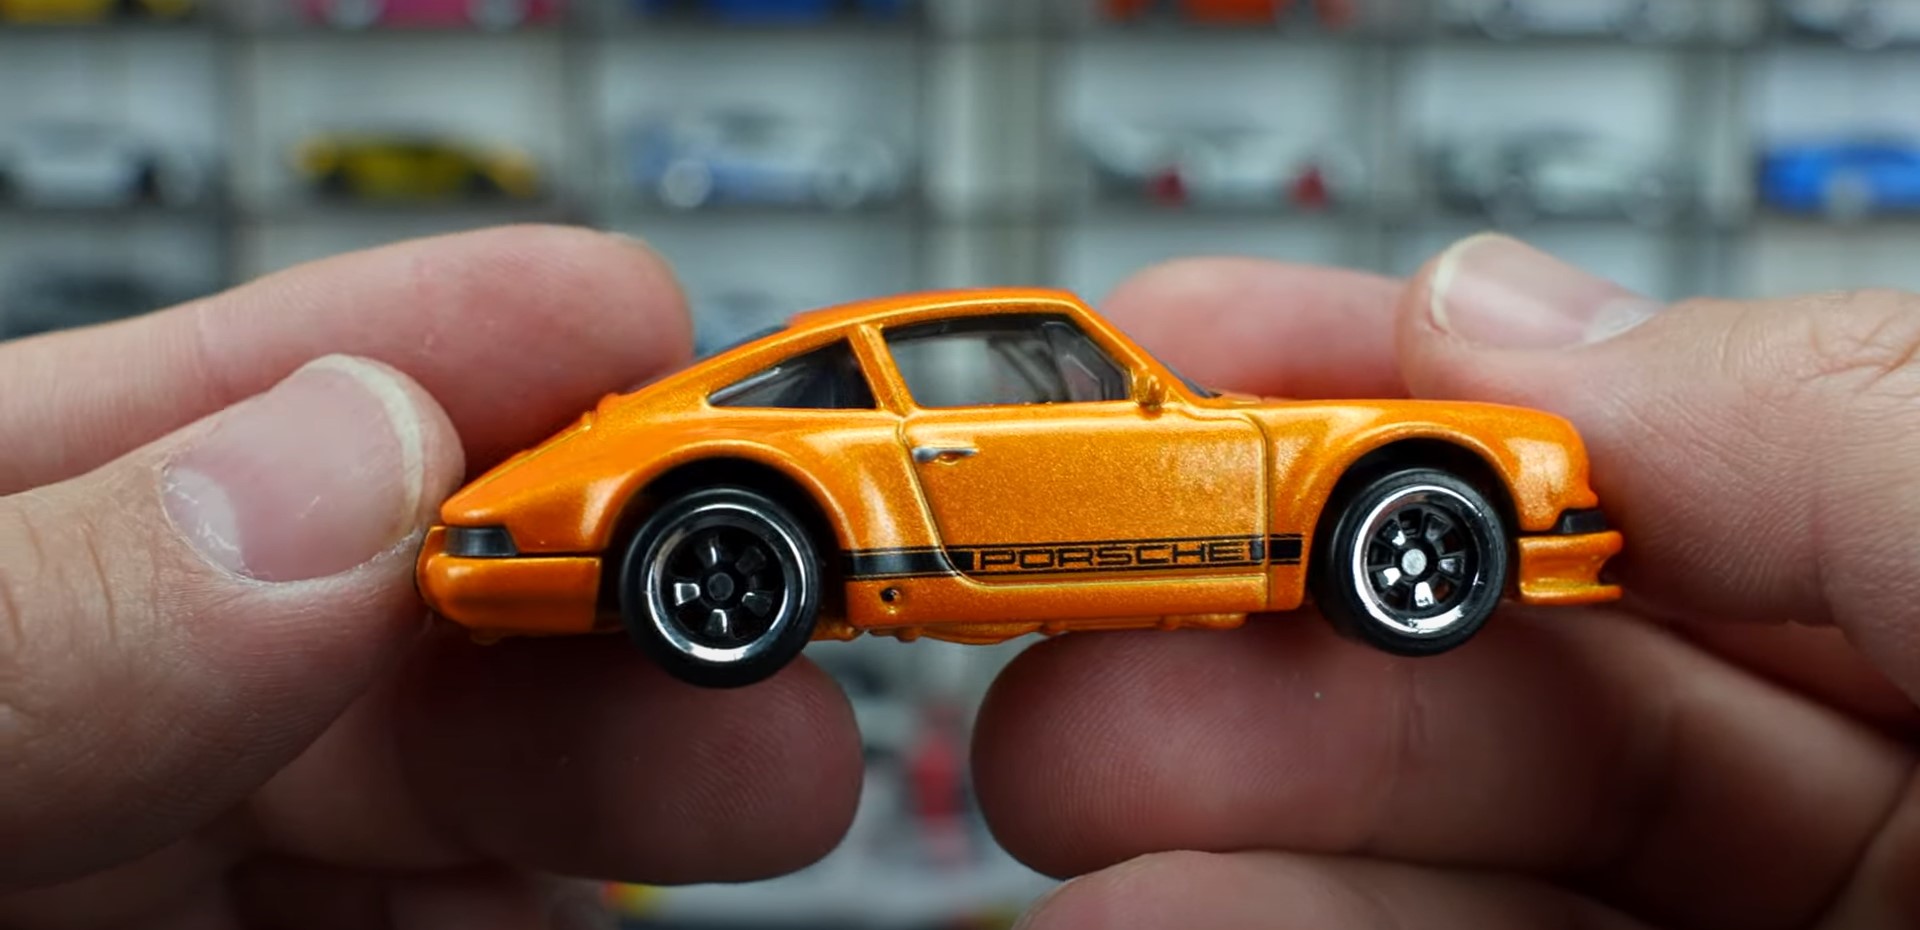 New Hot Wheels Set of Six Porsches Will Sell Like Hot Cakes - autoevolution